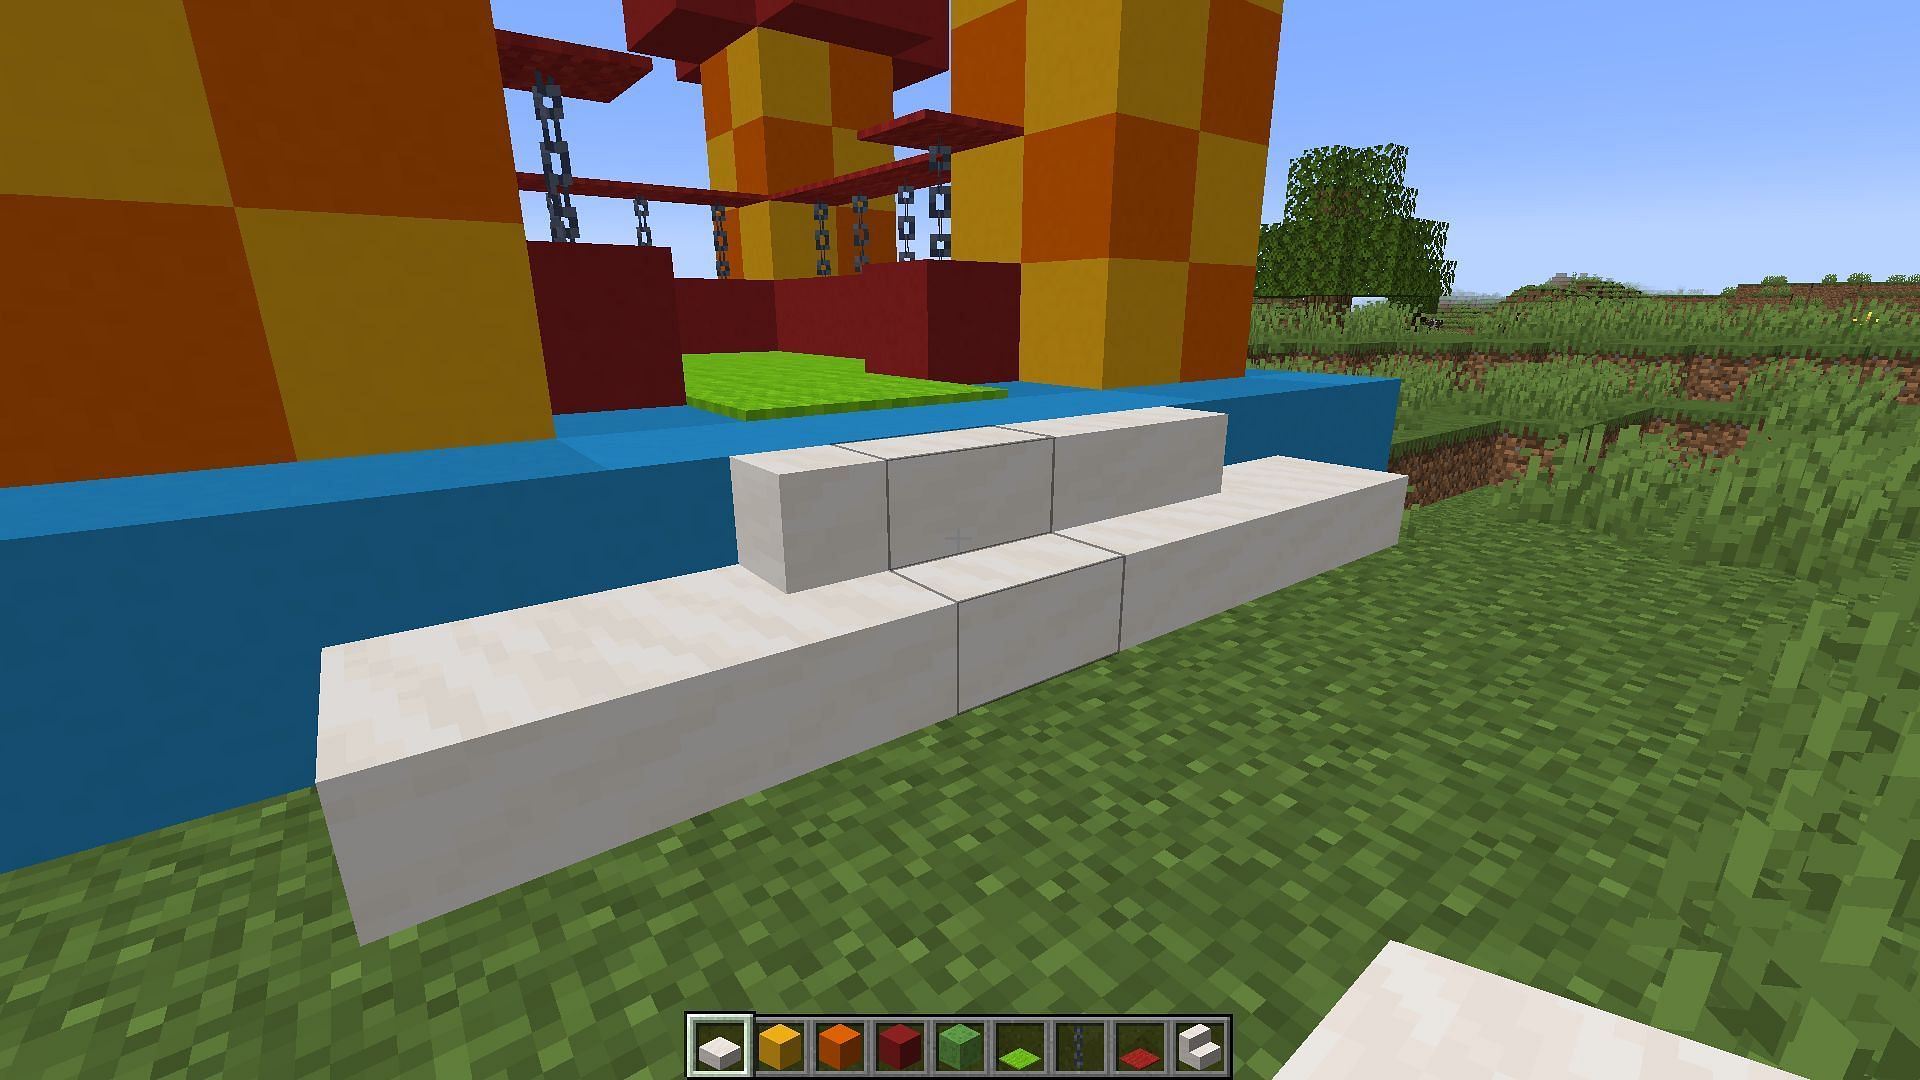 The stairs added to the bouncy house (Image via Minecraft)